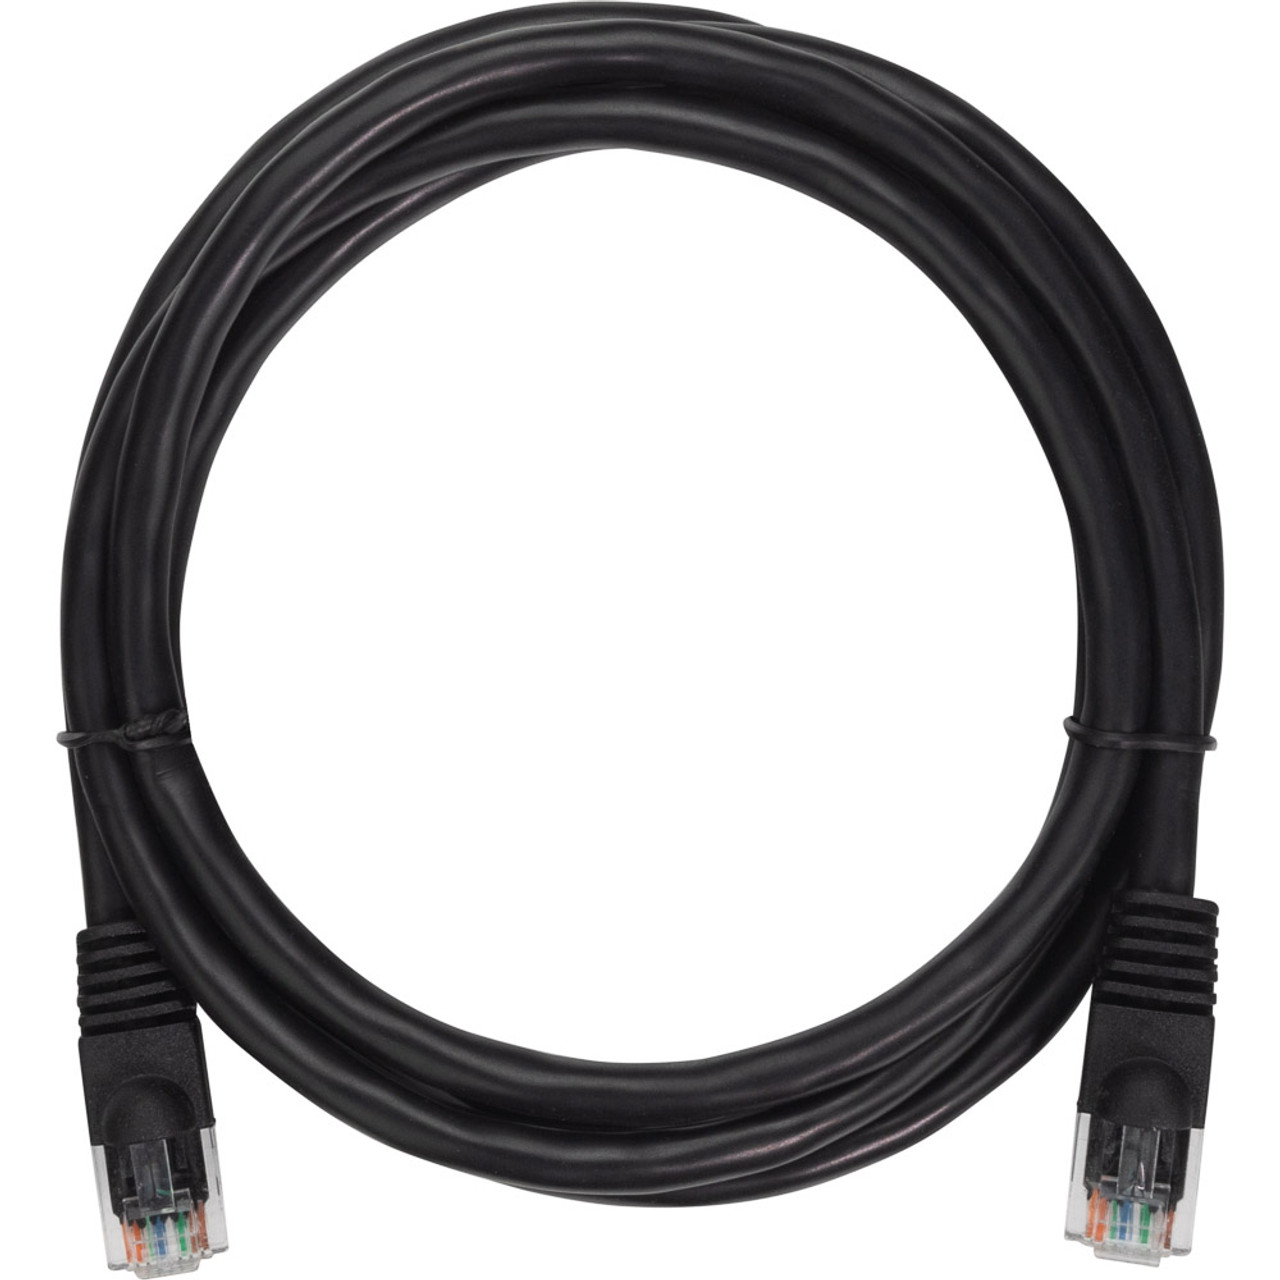 NavePoint Cat5e UTP Ethernet Network Patch Cable - 5 Ft. Black